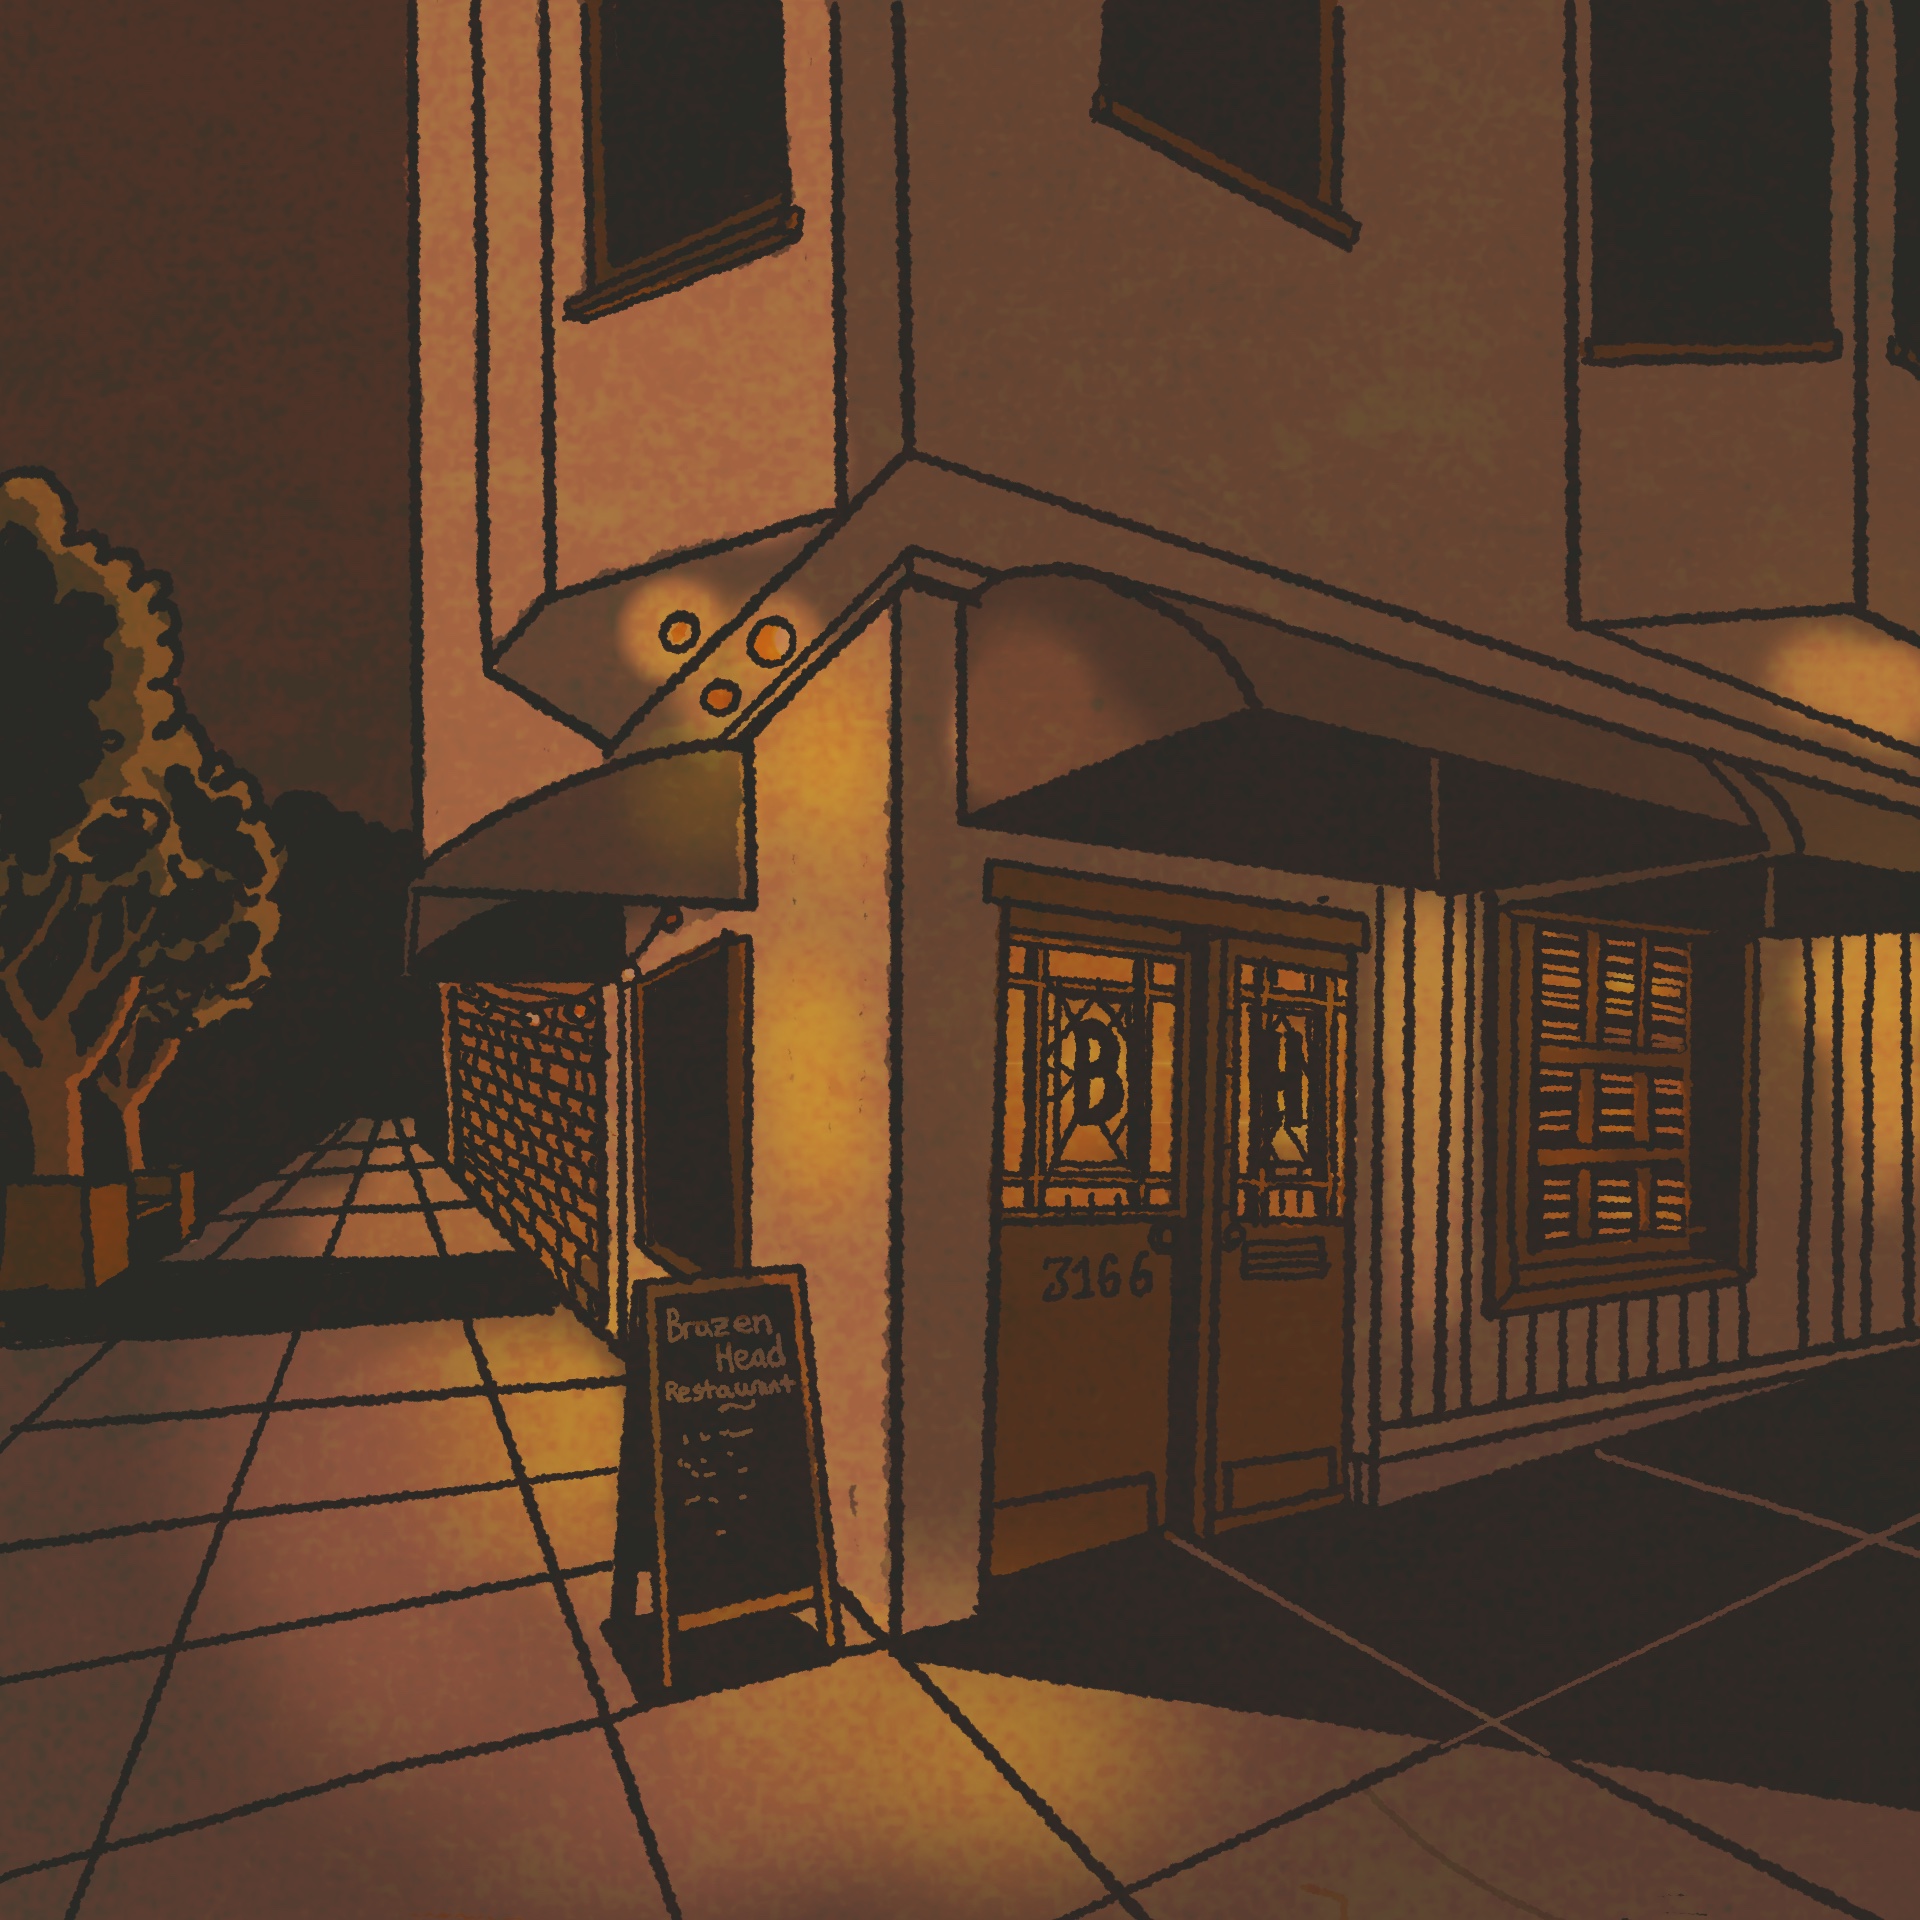 Illustration: The facade of an unmarked bar pictured late at night.